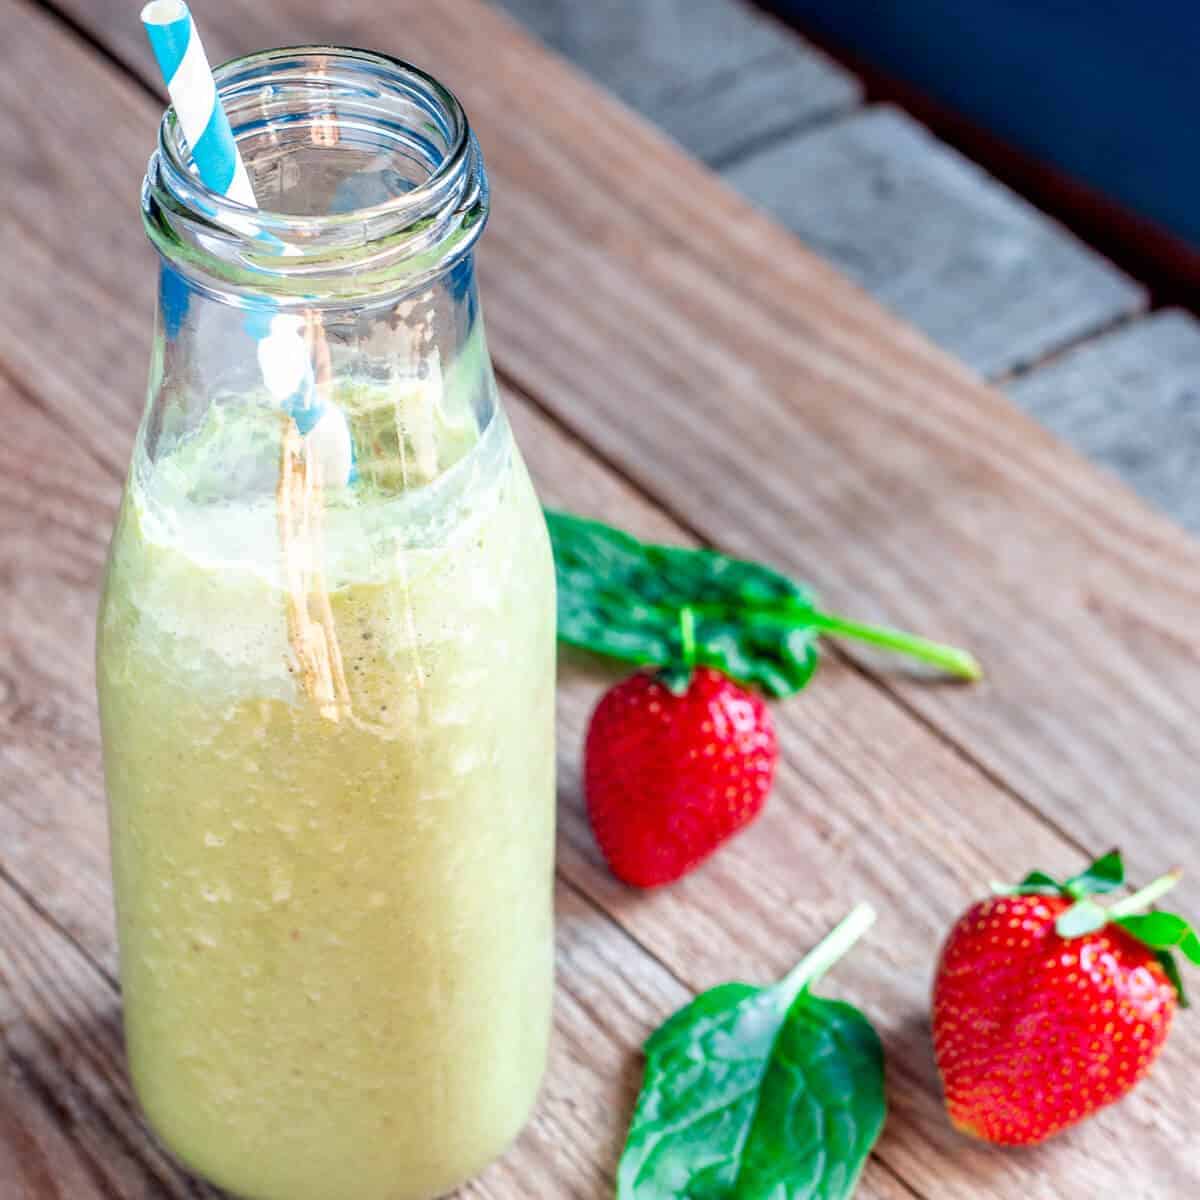 A bottle full of spinach smoothie with a blue and white straw inside, and a couple of strawberries scattered around the bottle.